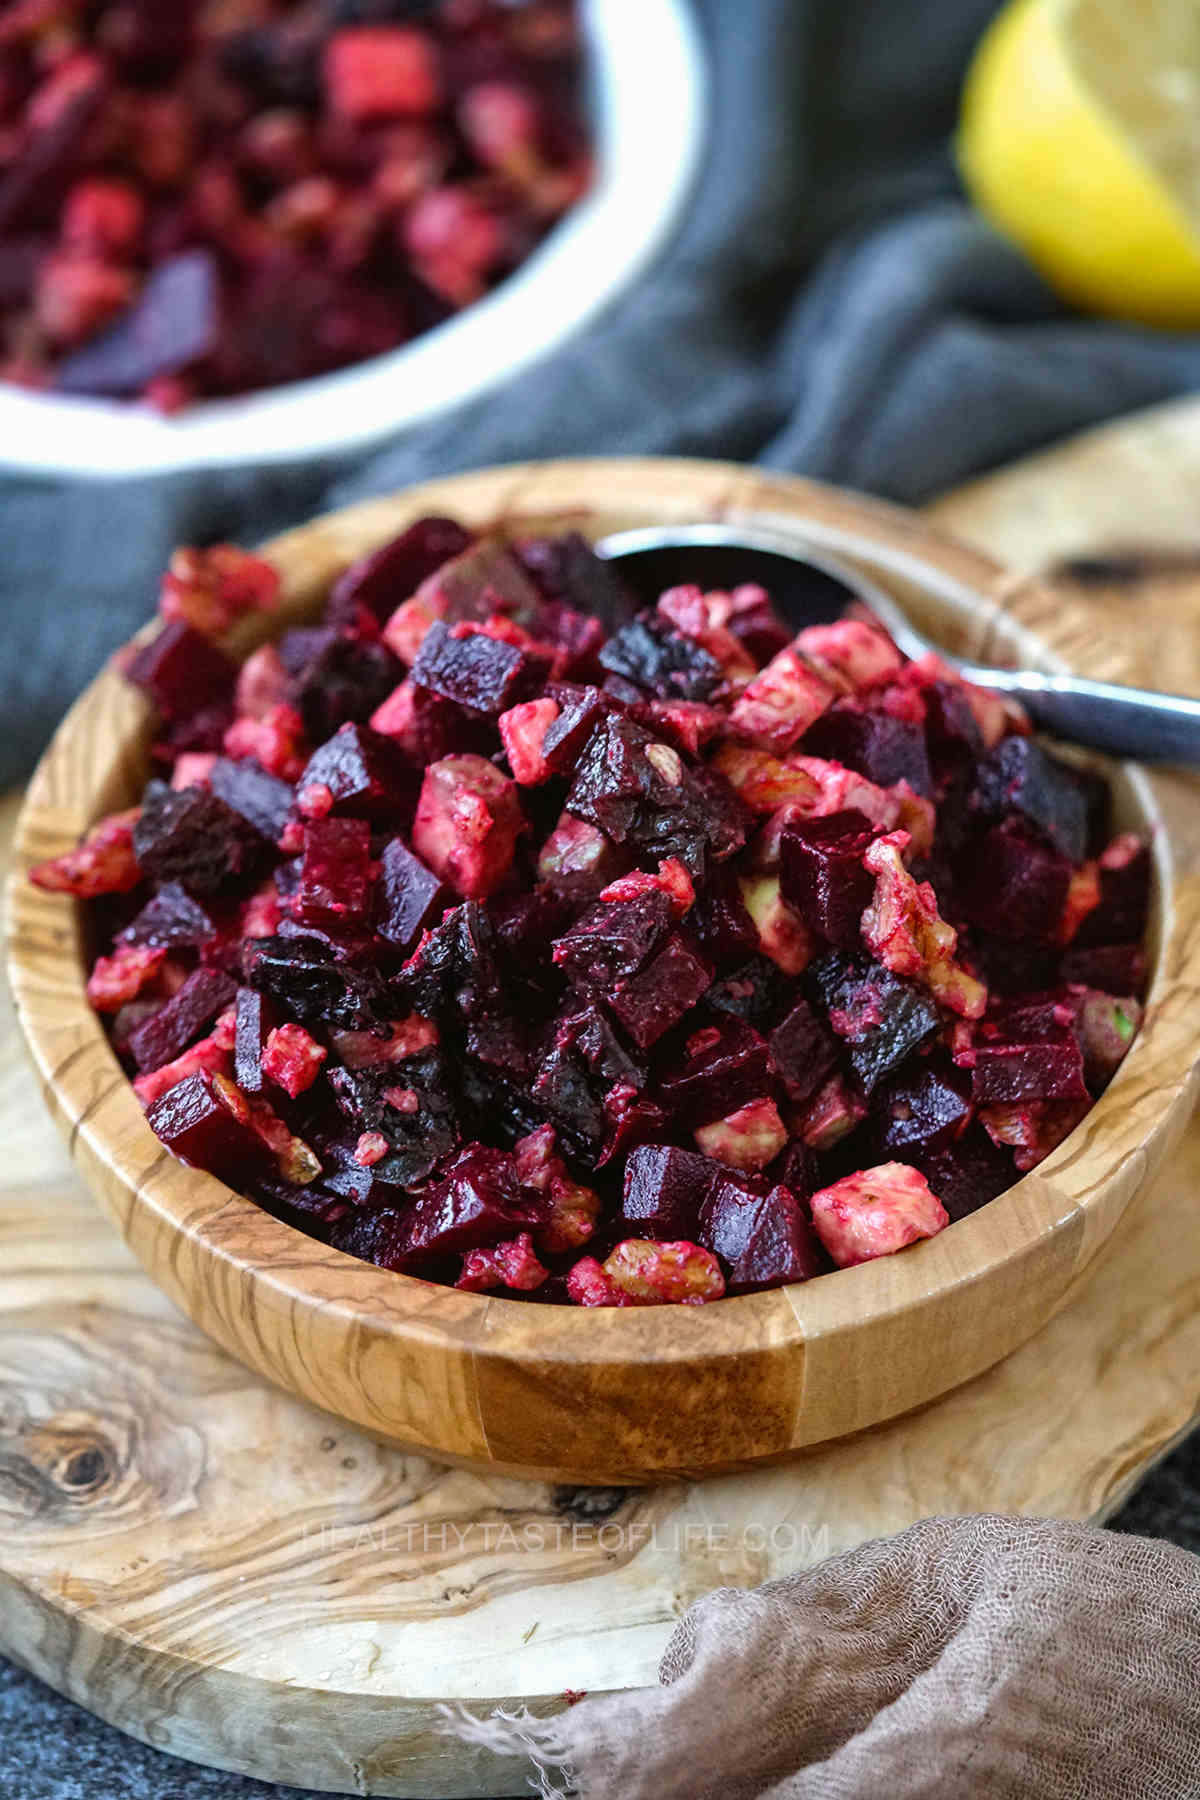 Russian salad with beets walnuts prunes and avocado - cold beet salad with vegan ingredients in a bowl.